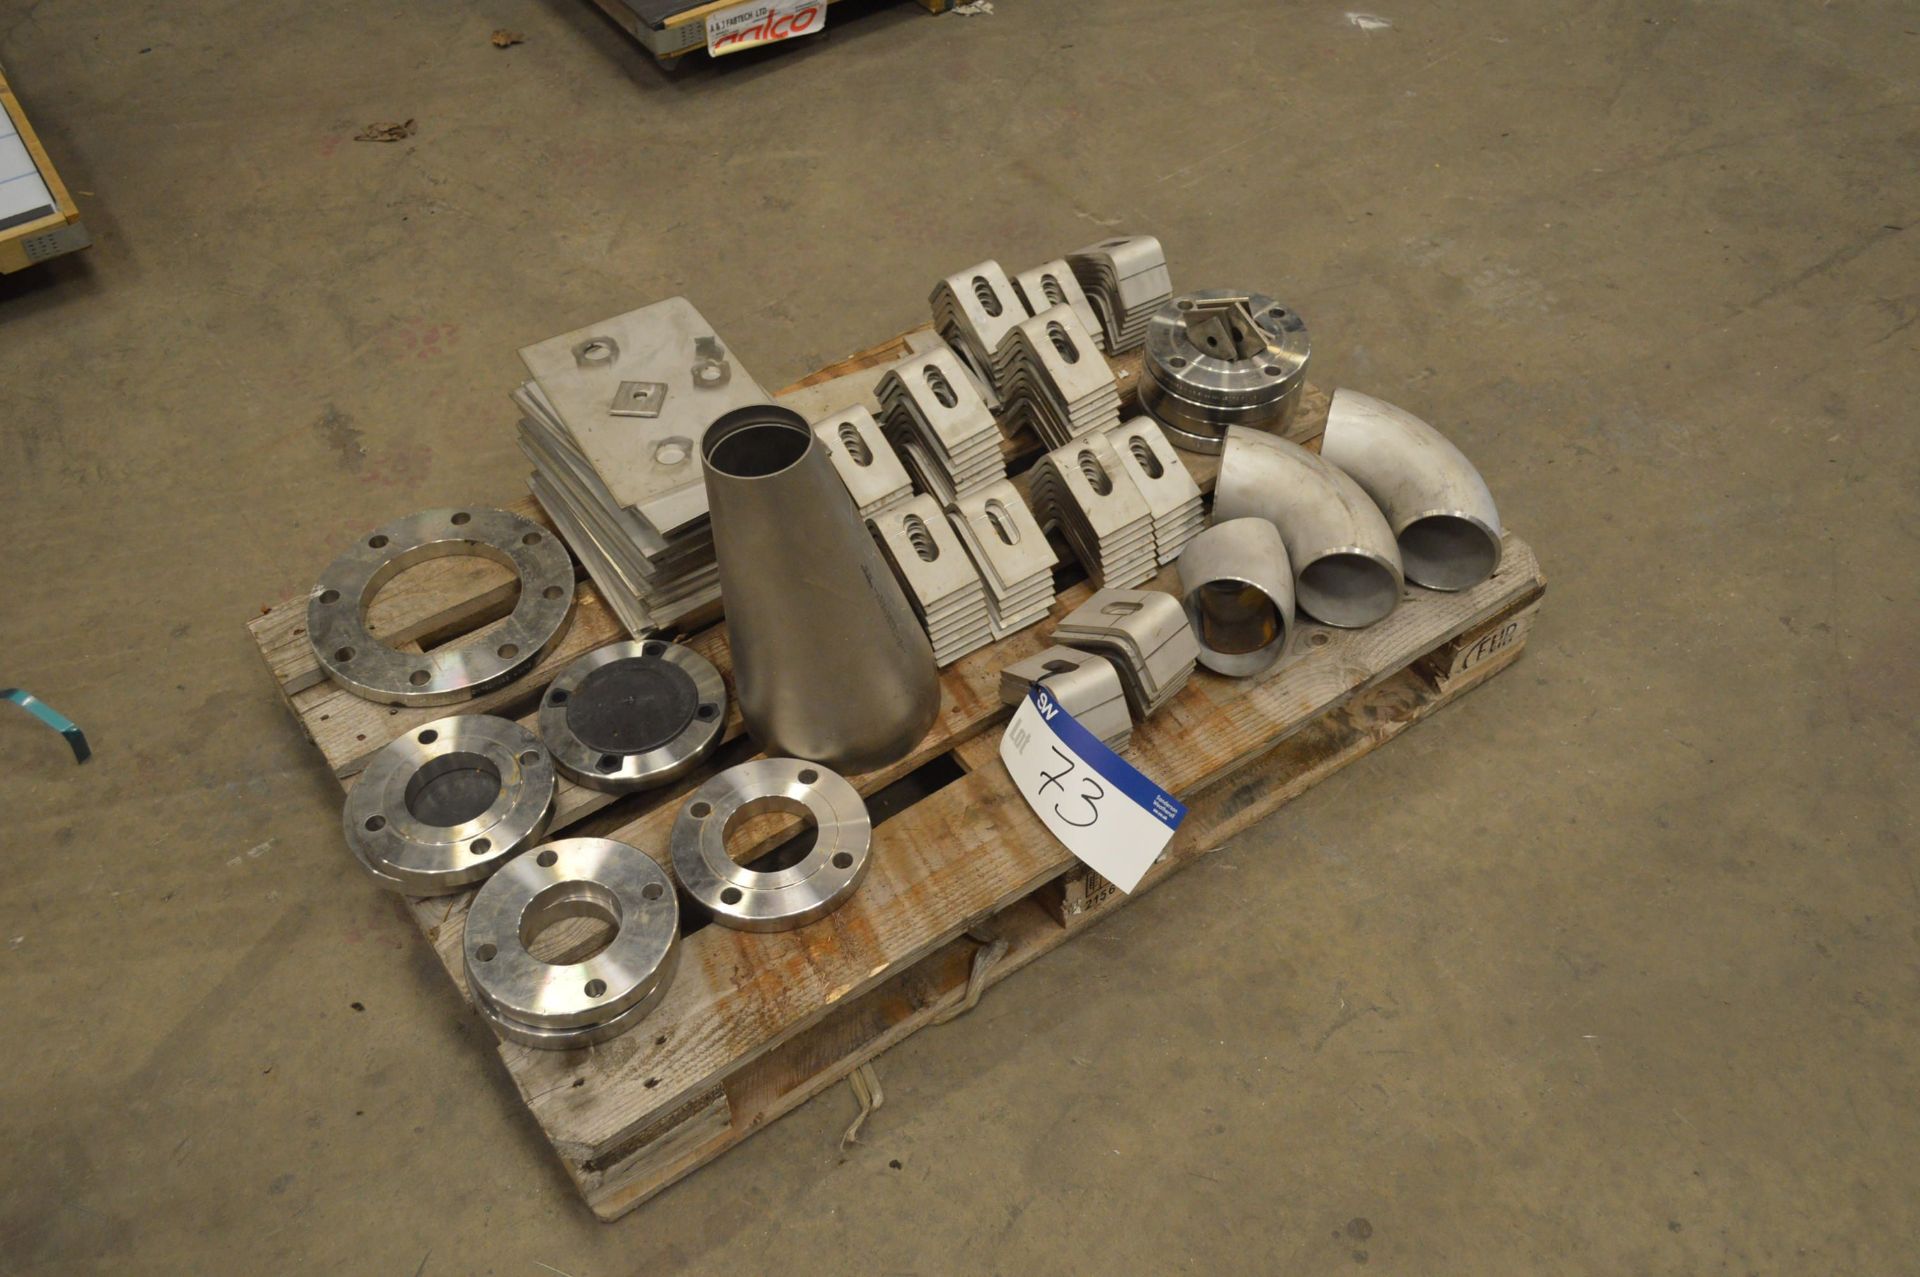 Stainless Steel Components, on one pallet